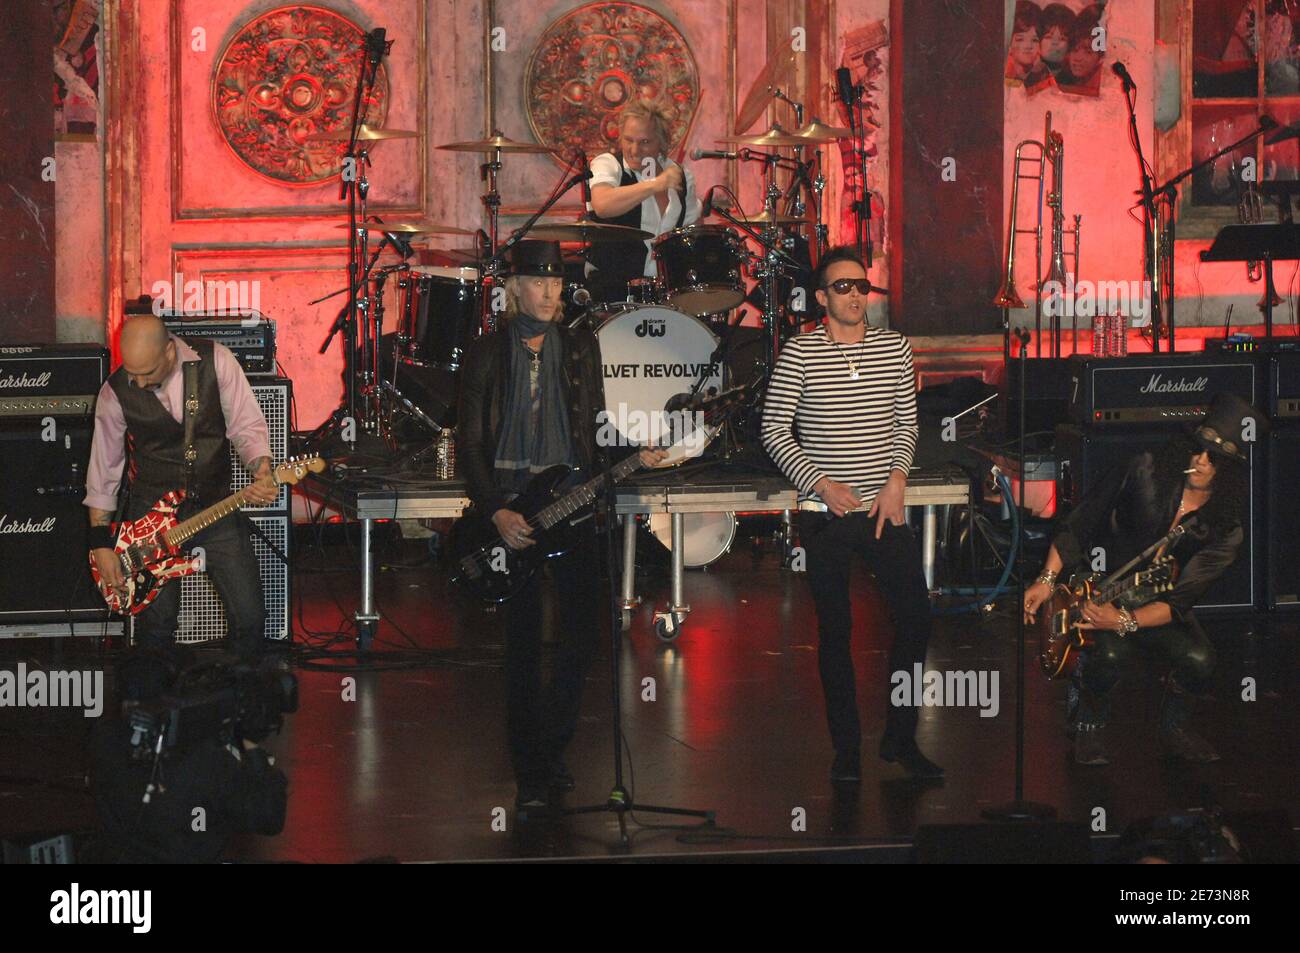 'Velvet Revolver' perform onstage at the 22nd annual Rock And Roll Hall of Fame Induction Ceremony held at the Waldorf Astoria Hotel in New York City, NY, USA on March 12, 2007. Photo by Gregorio Binuya/ABACAPRESS.COM Stock Photo